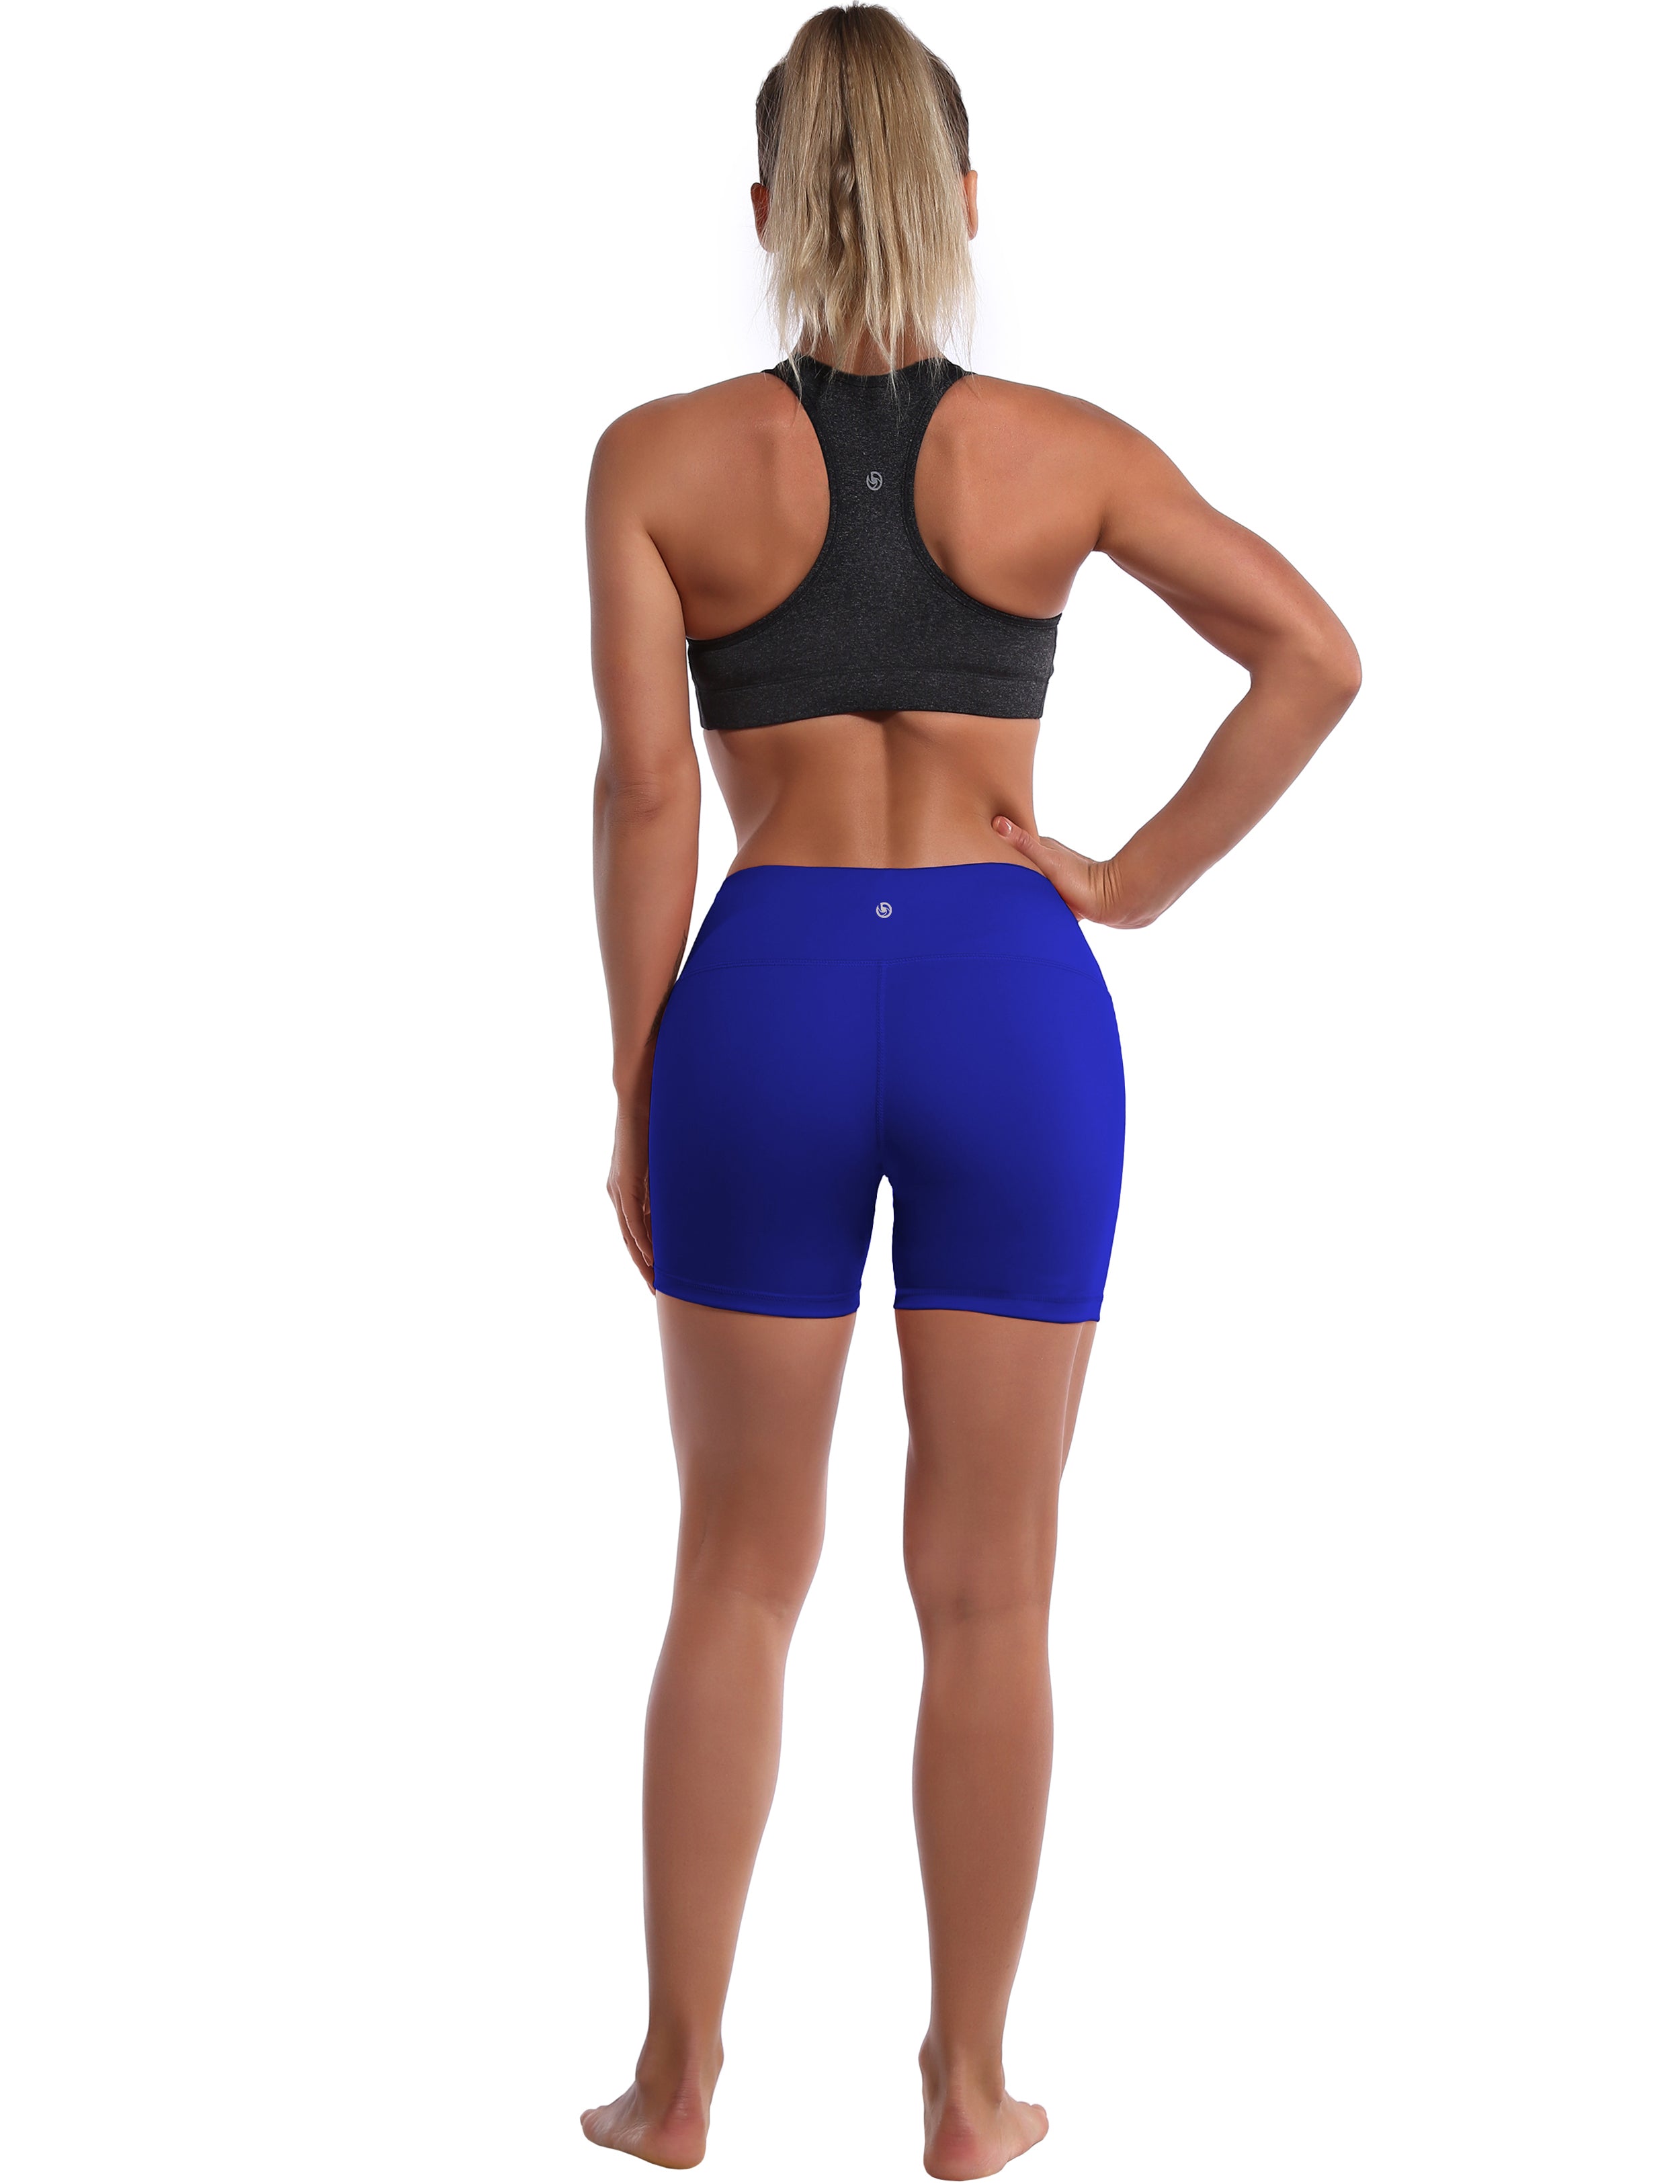 4" Golf Shorts navy Sleek, soft, smooth and totally comfortable: our newest style is here. Softest-ever fabric High elasticity High density 4-way stretch Fabric doesn't attract lint easily No see-through Moisture-wicking Machine wash 75% Nylon, 25% Spandex